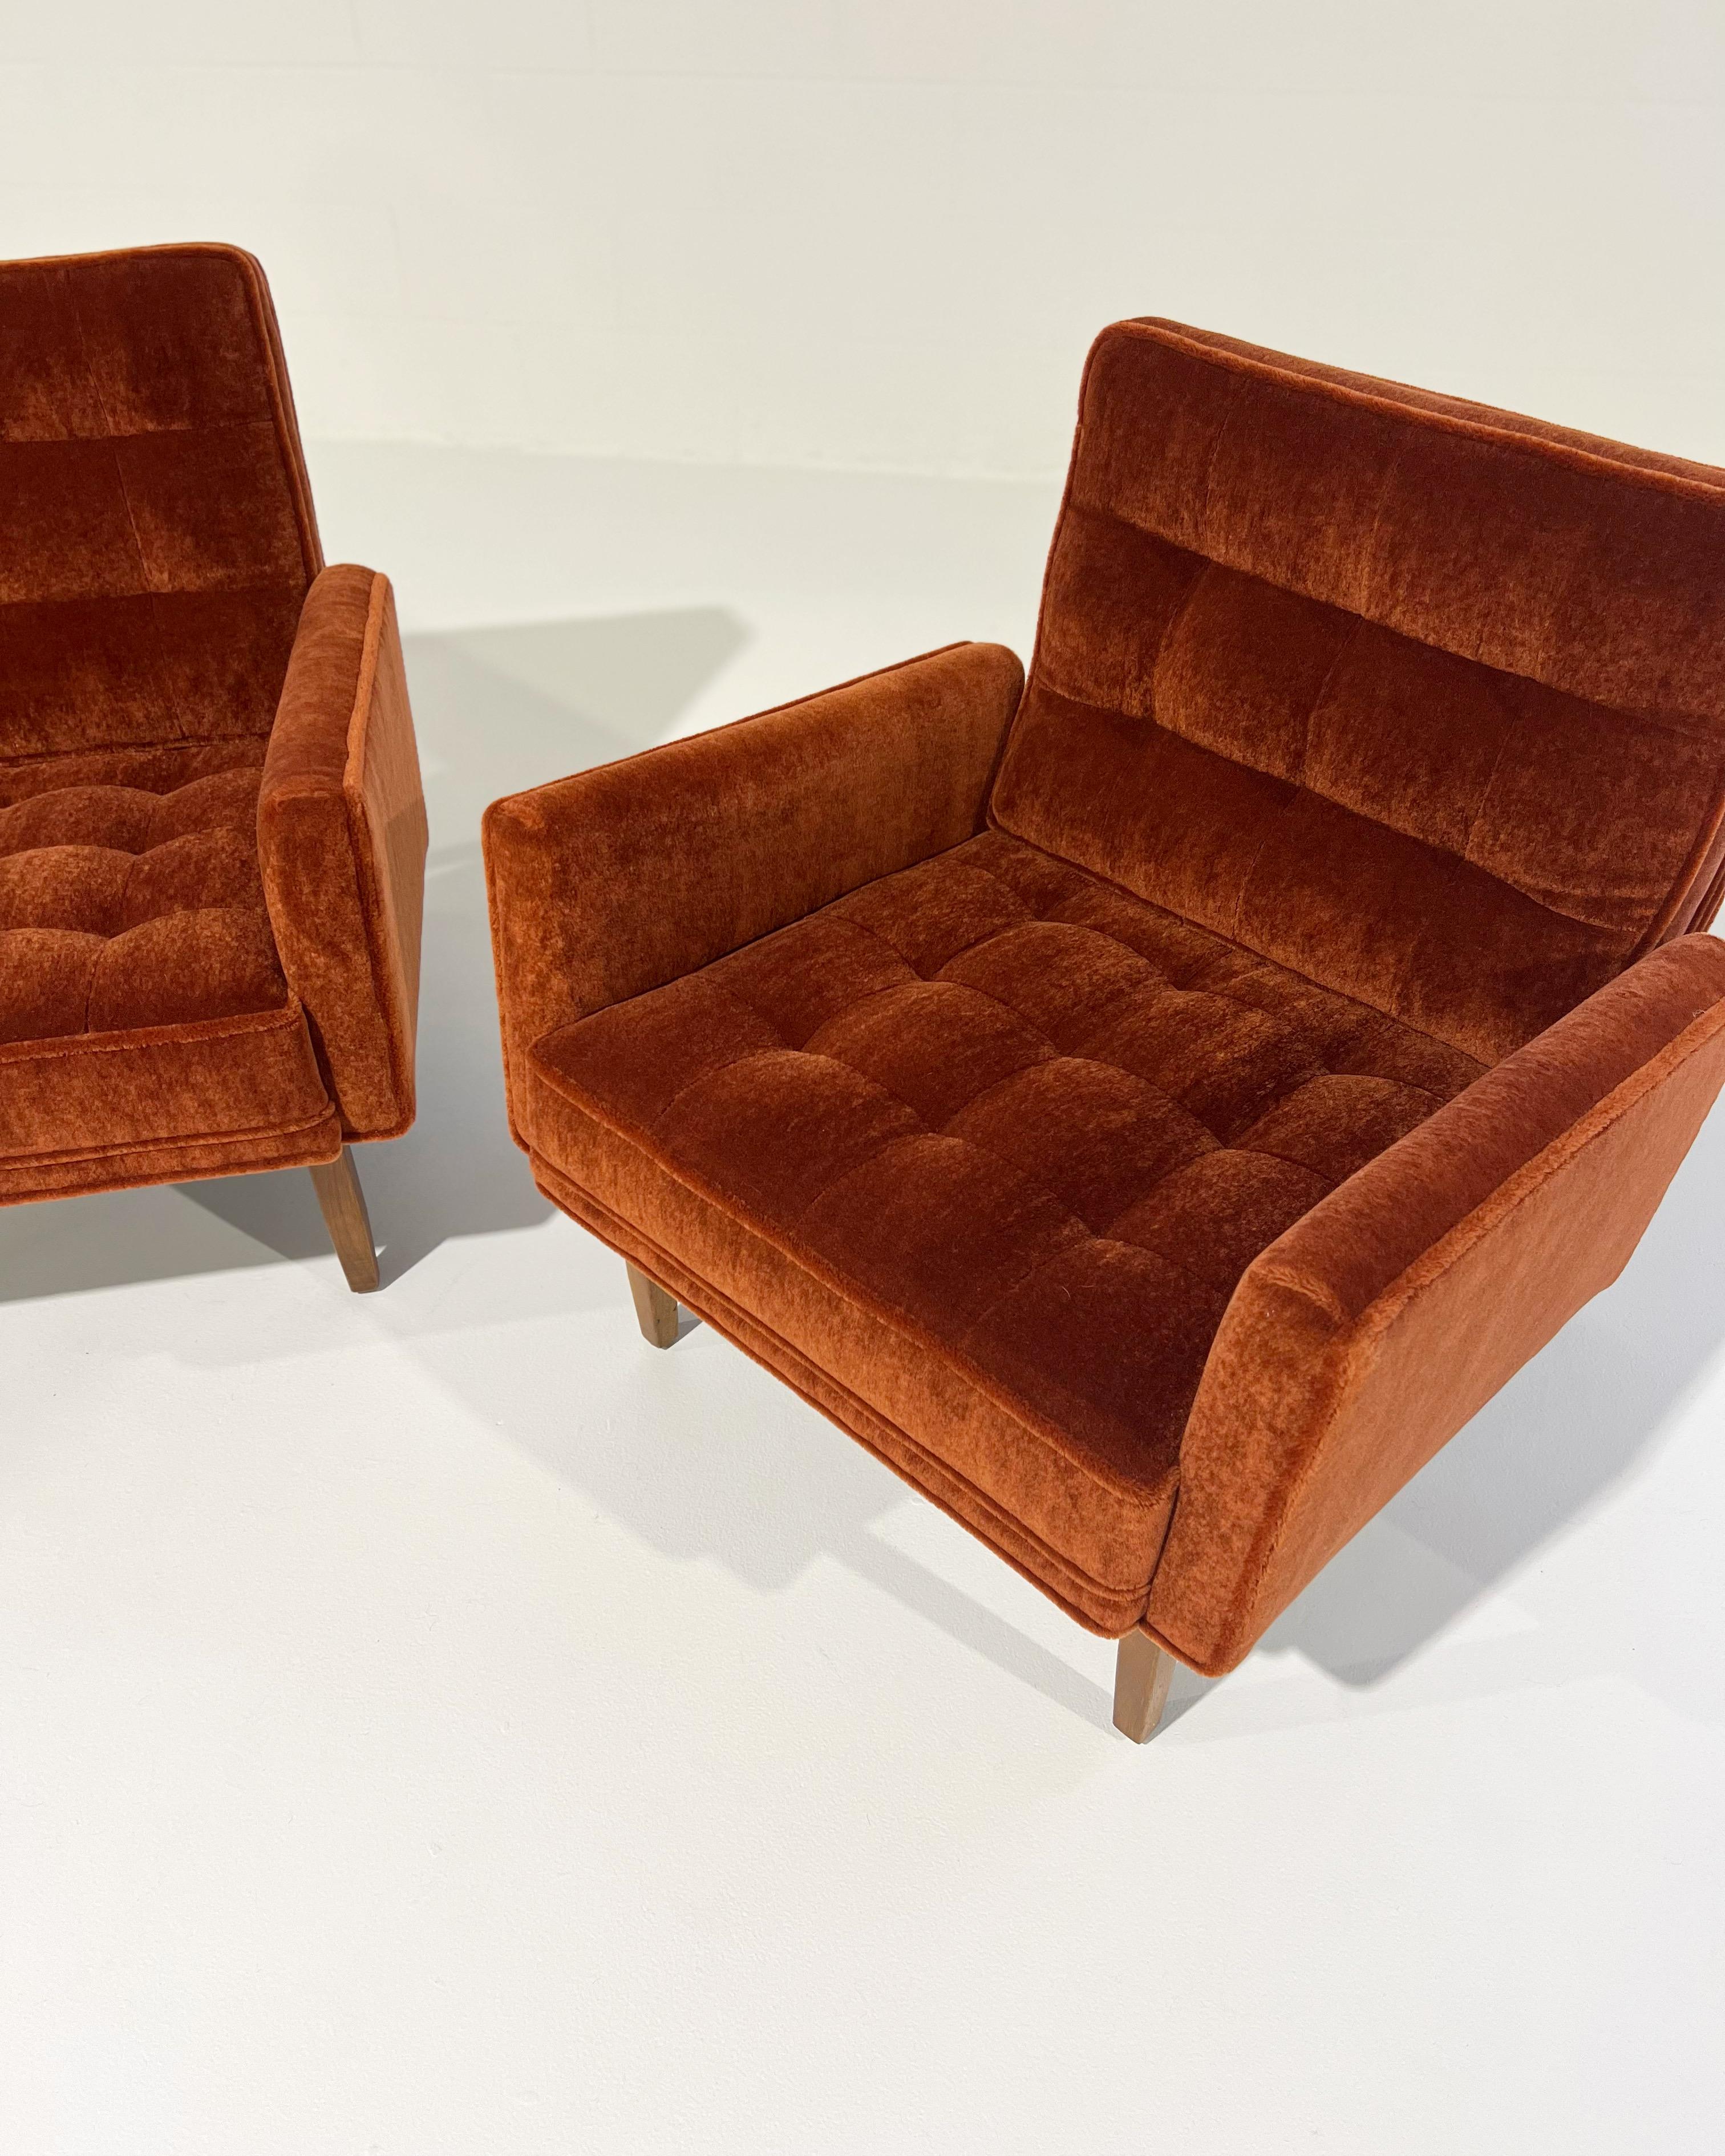 These are so beautiful and so comfortable. We love the architectural lines and geometric profile of this iconic Florence Knoll design. This pair is an early example with the walnut legs. Our design team chose a gorgeous Pierre Frey mohair in a deep